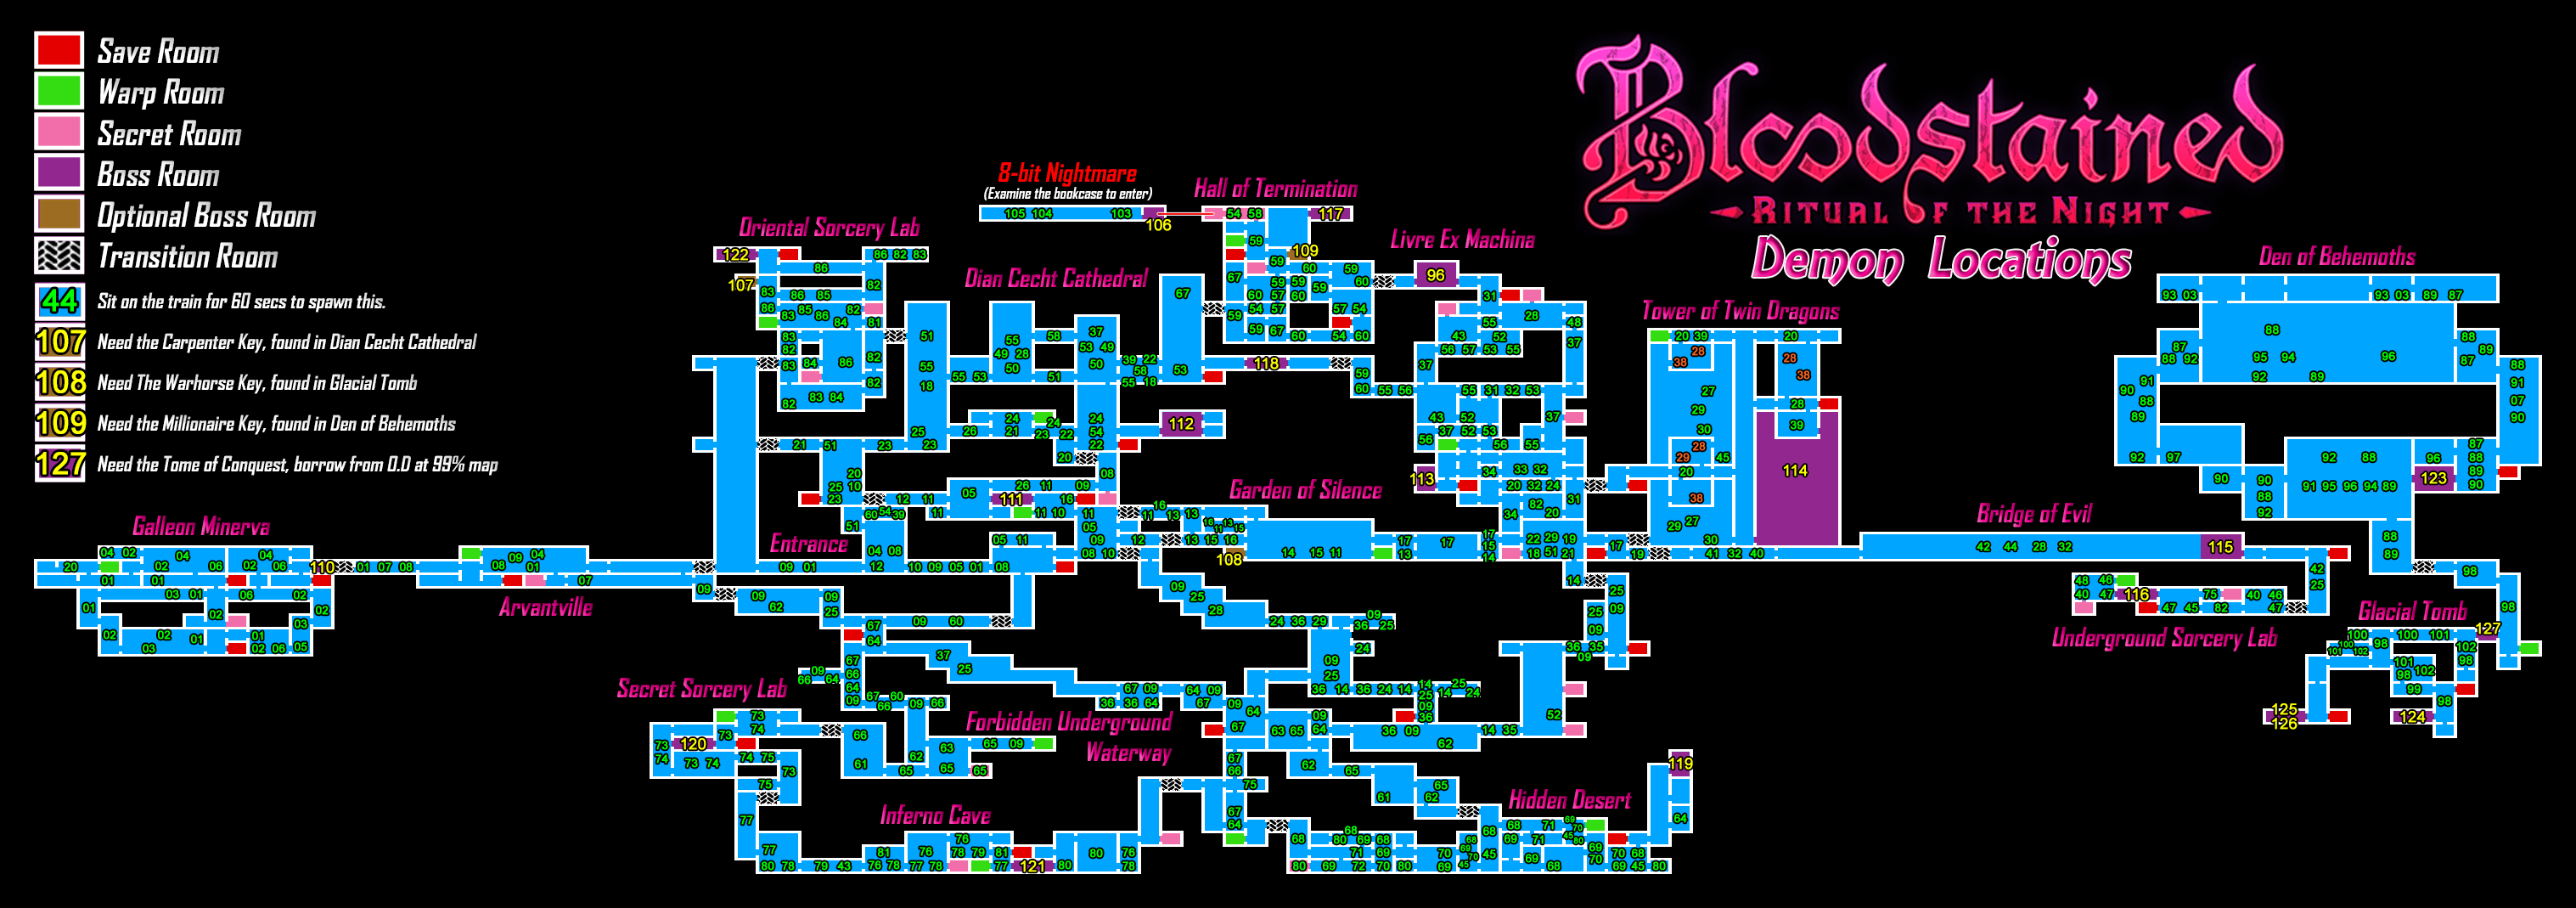 Bloodstained: Ritual of the Night Definitive Collectible Guide. psnprofiles...